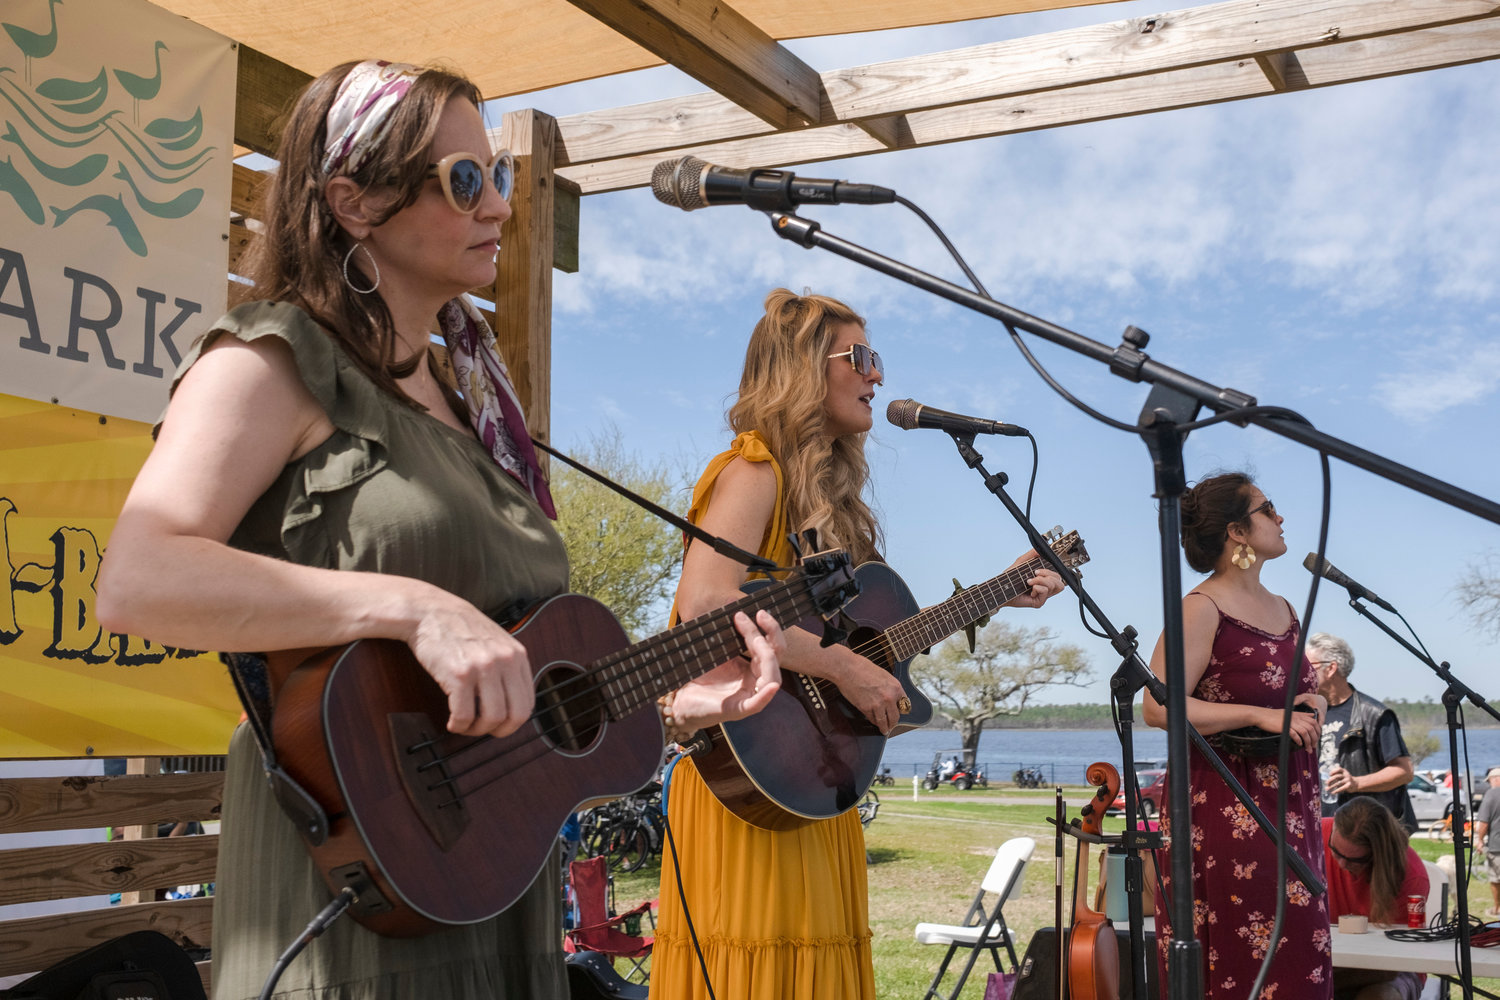 MICAH GREEN / GULF COAST MEDIA

The Krickets, a self-proclaimed swamp folk girl band, performs during Ballyhoo Festival at Gulf State Park on Saturday.